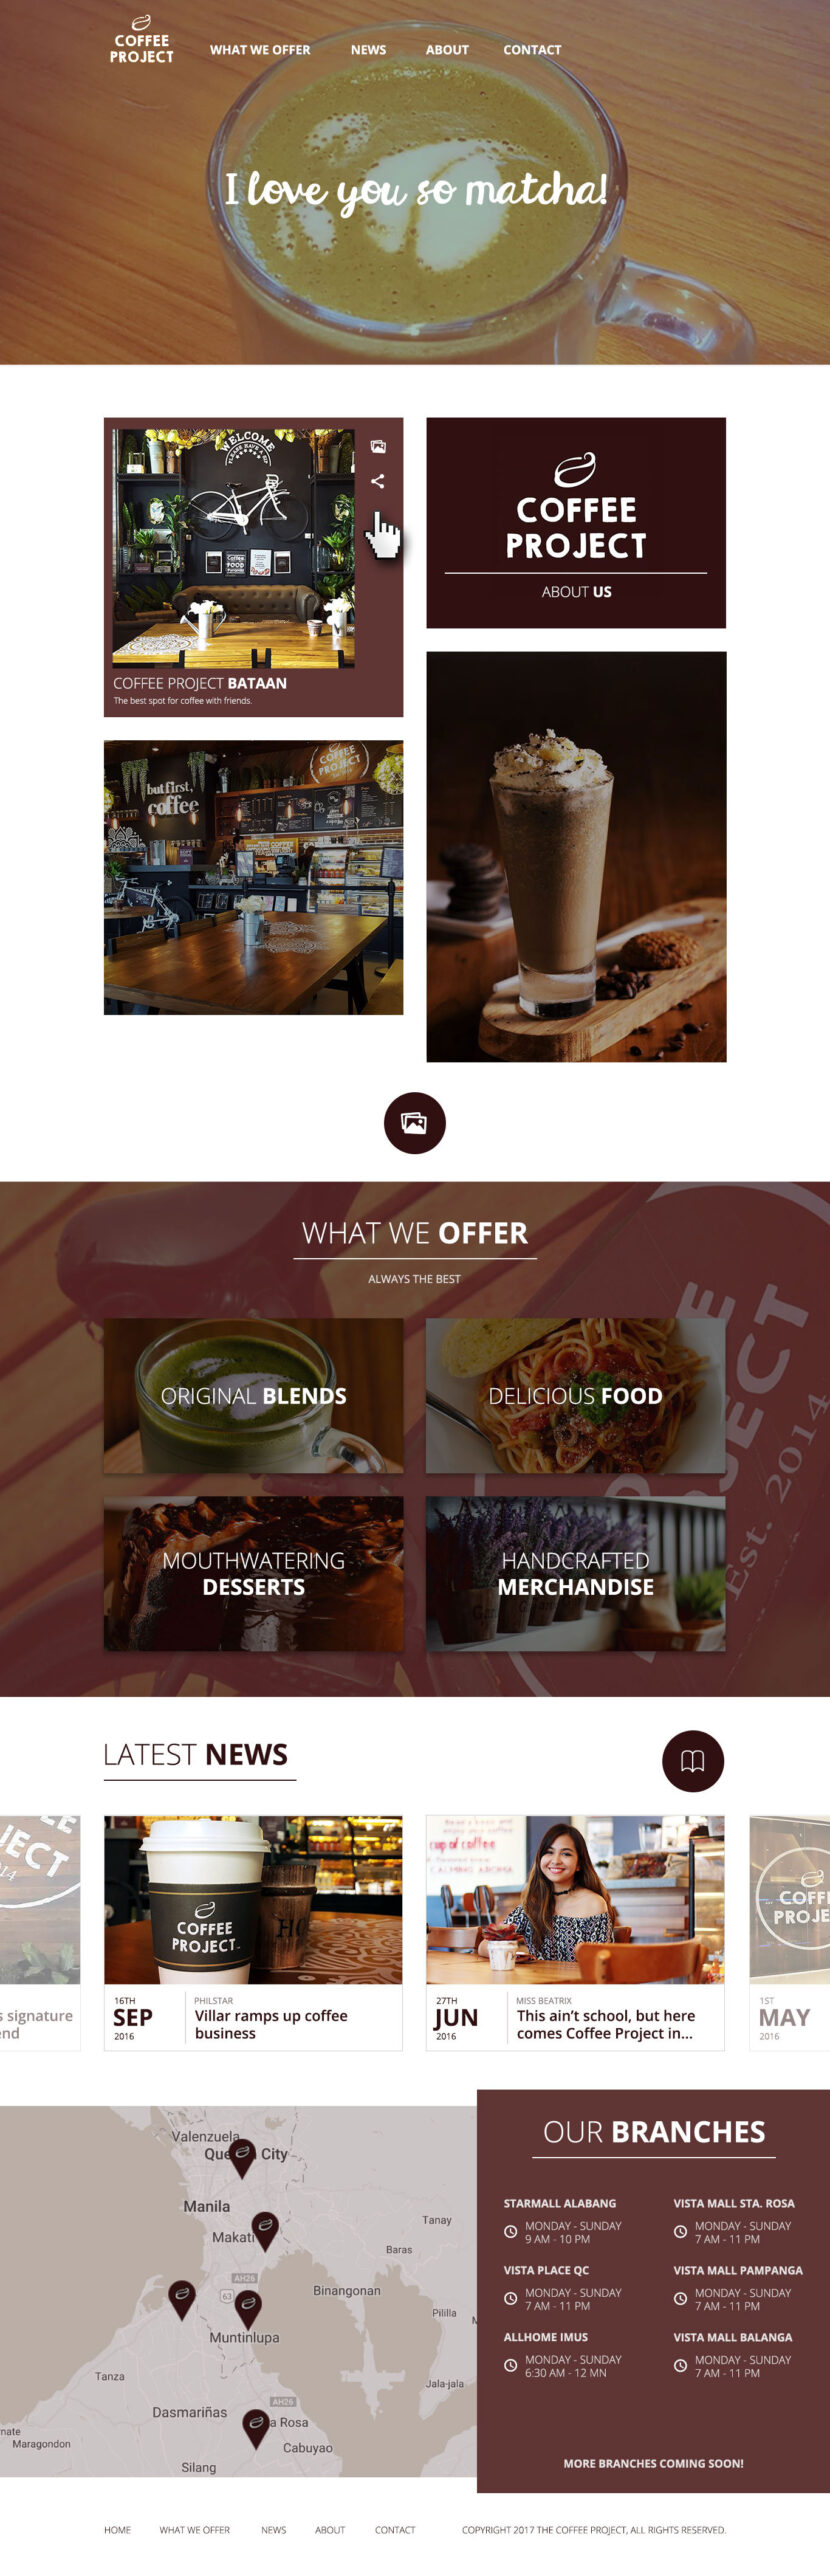 Coffee Project - Home Page